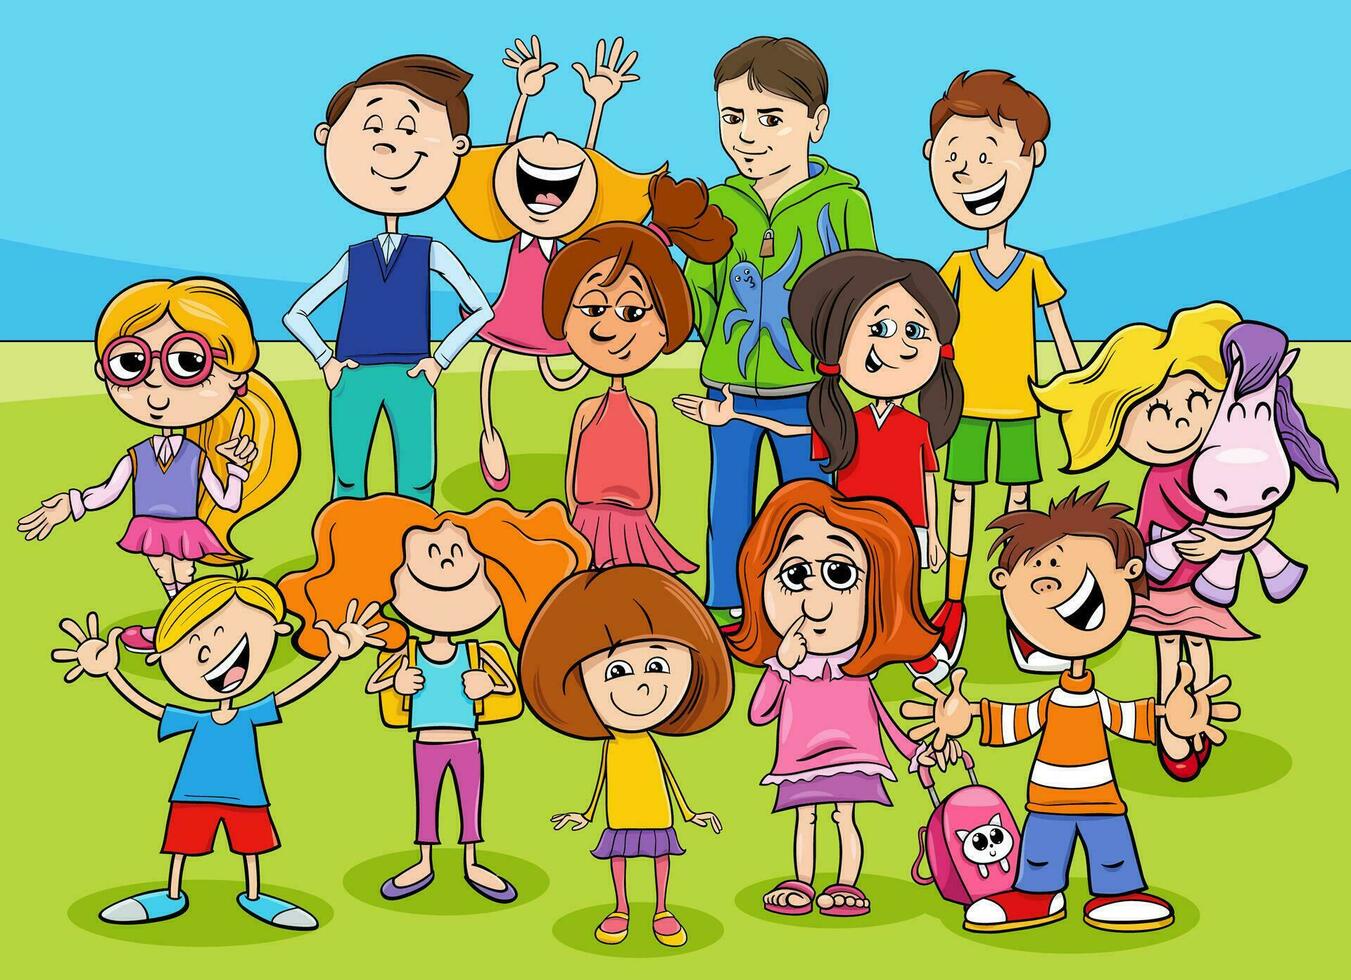 happy cartoon children and teenagers characters group vector